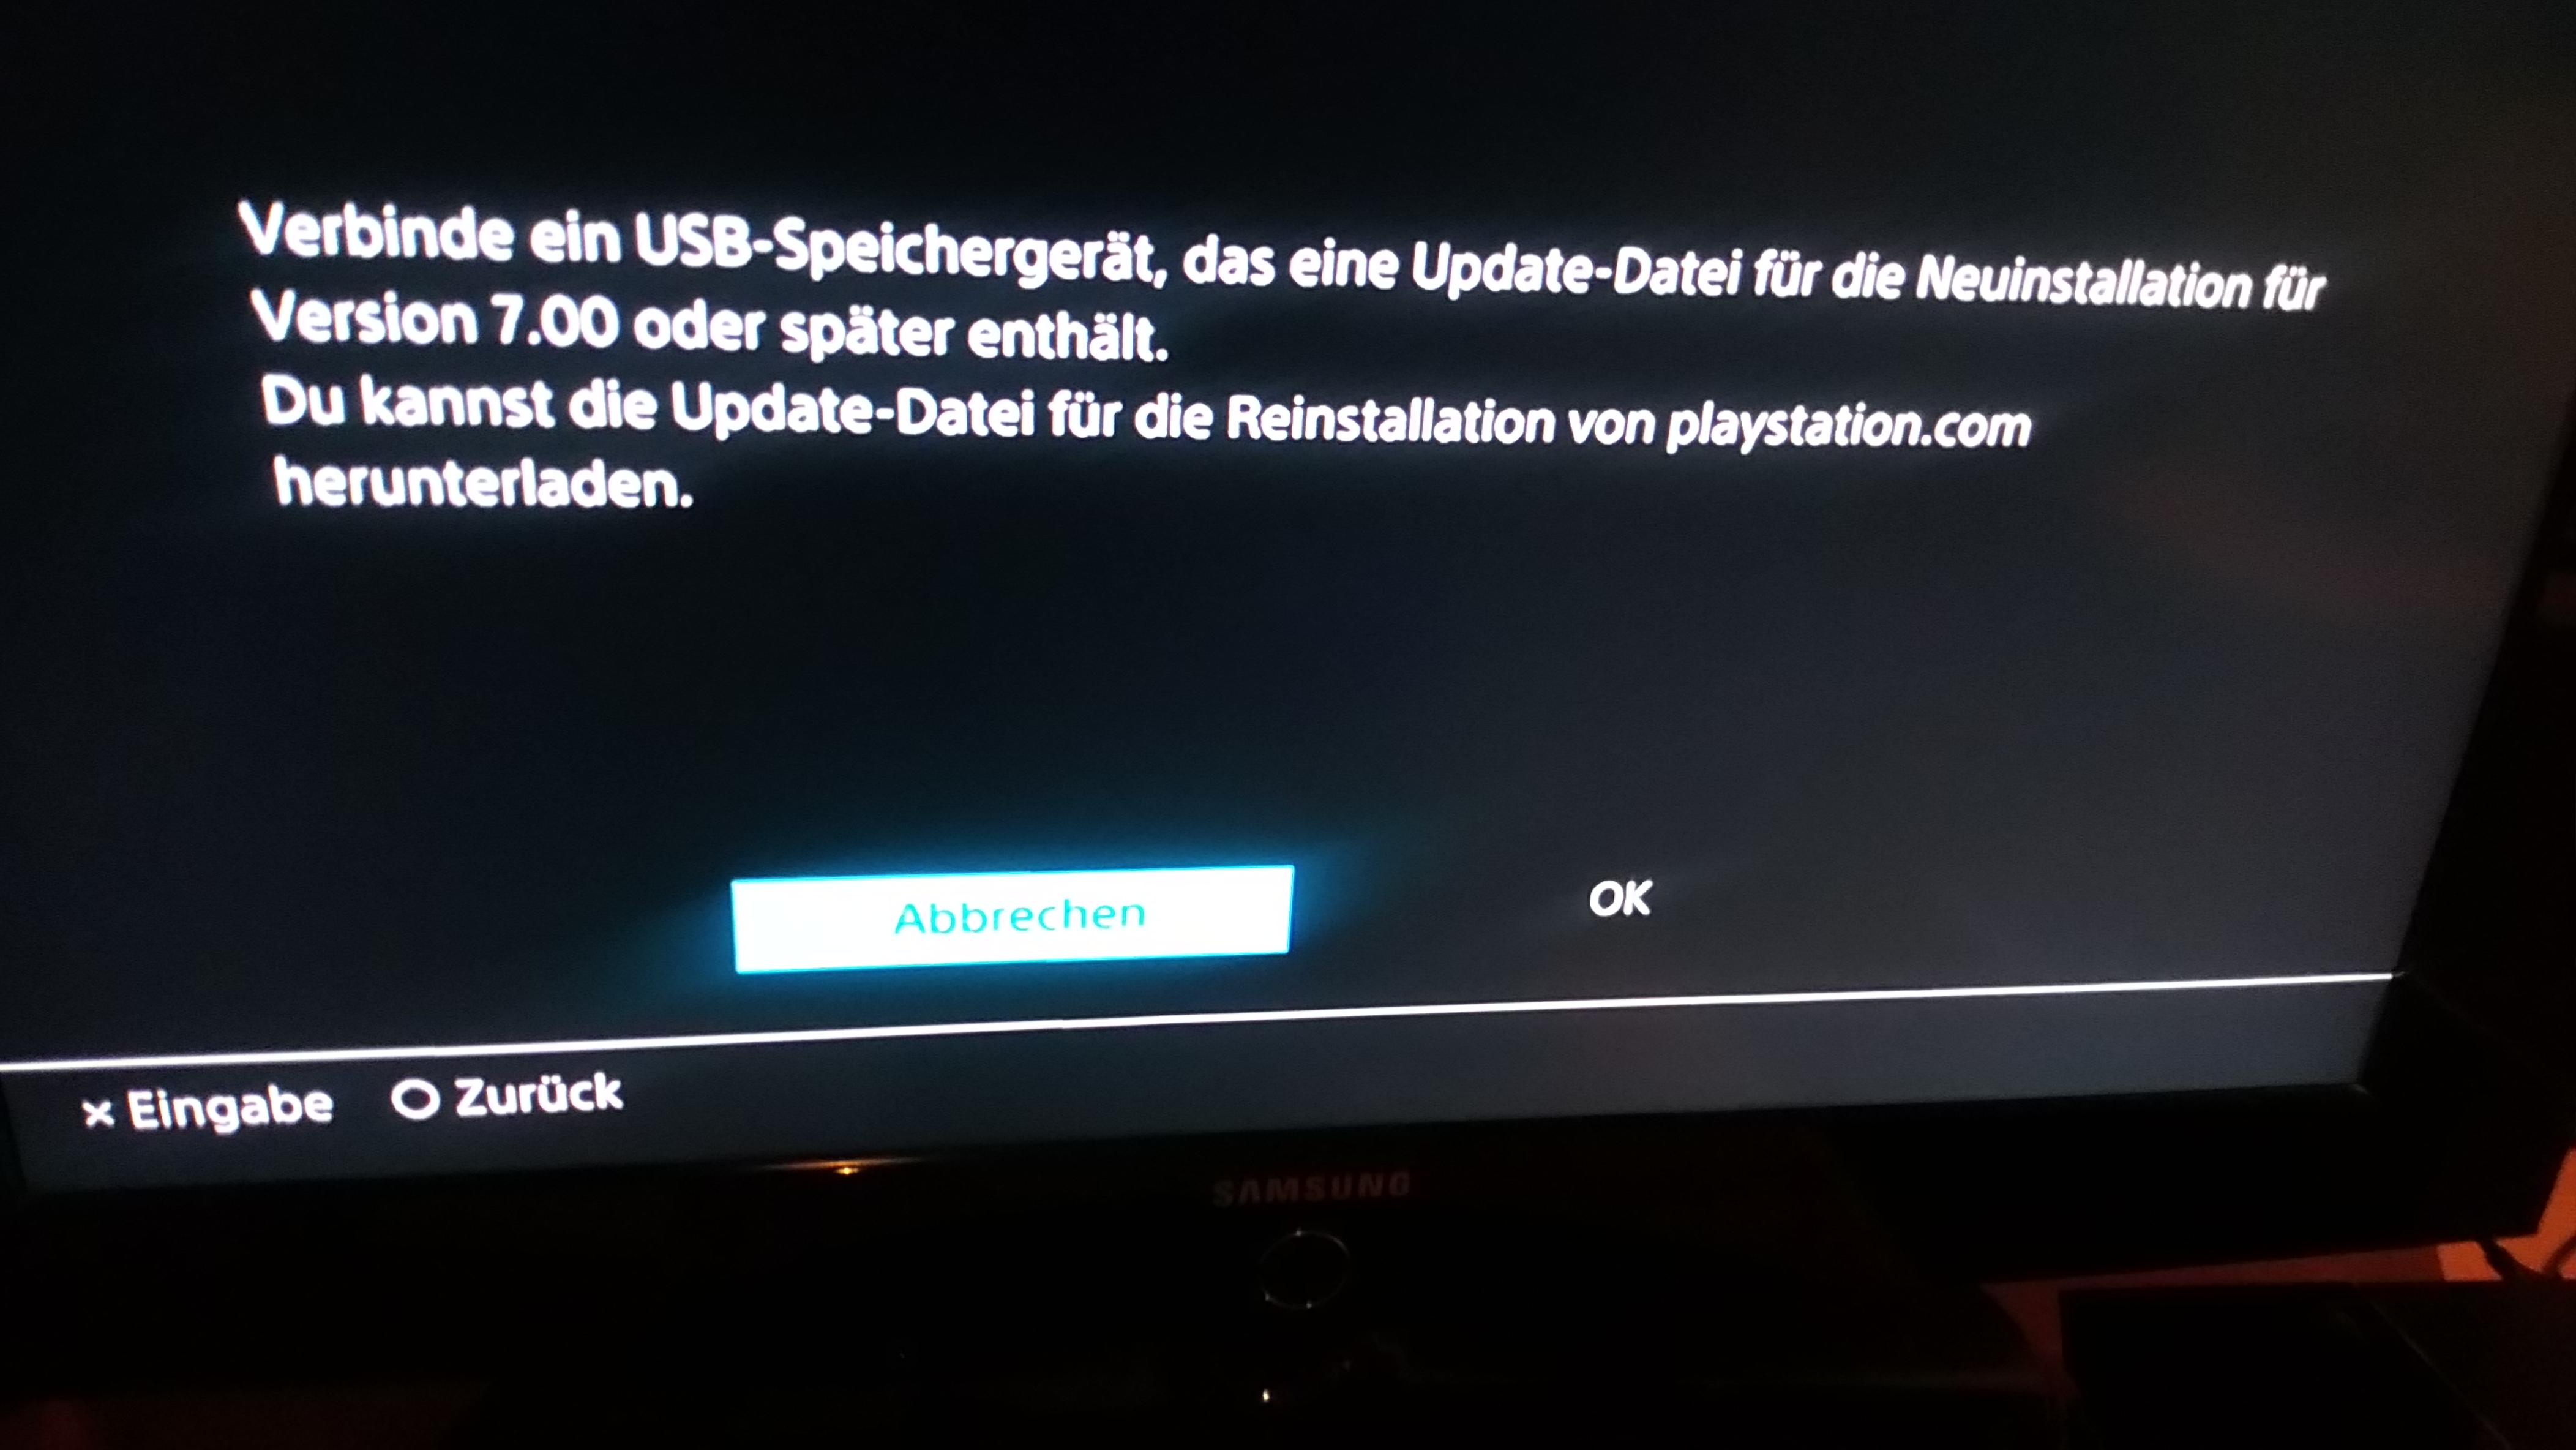 update file for reinstallation ps4 5.53 or later download free